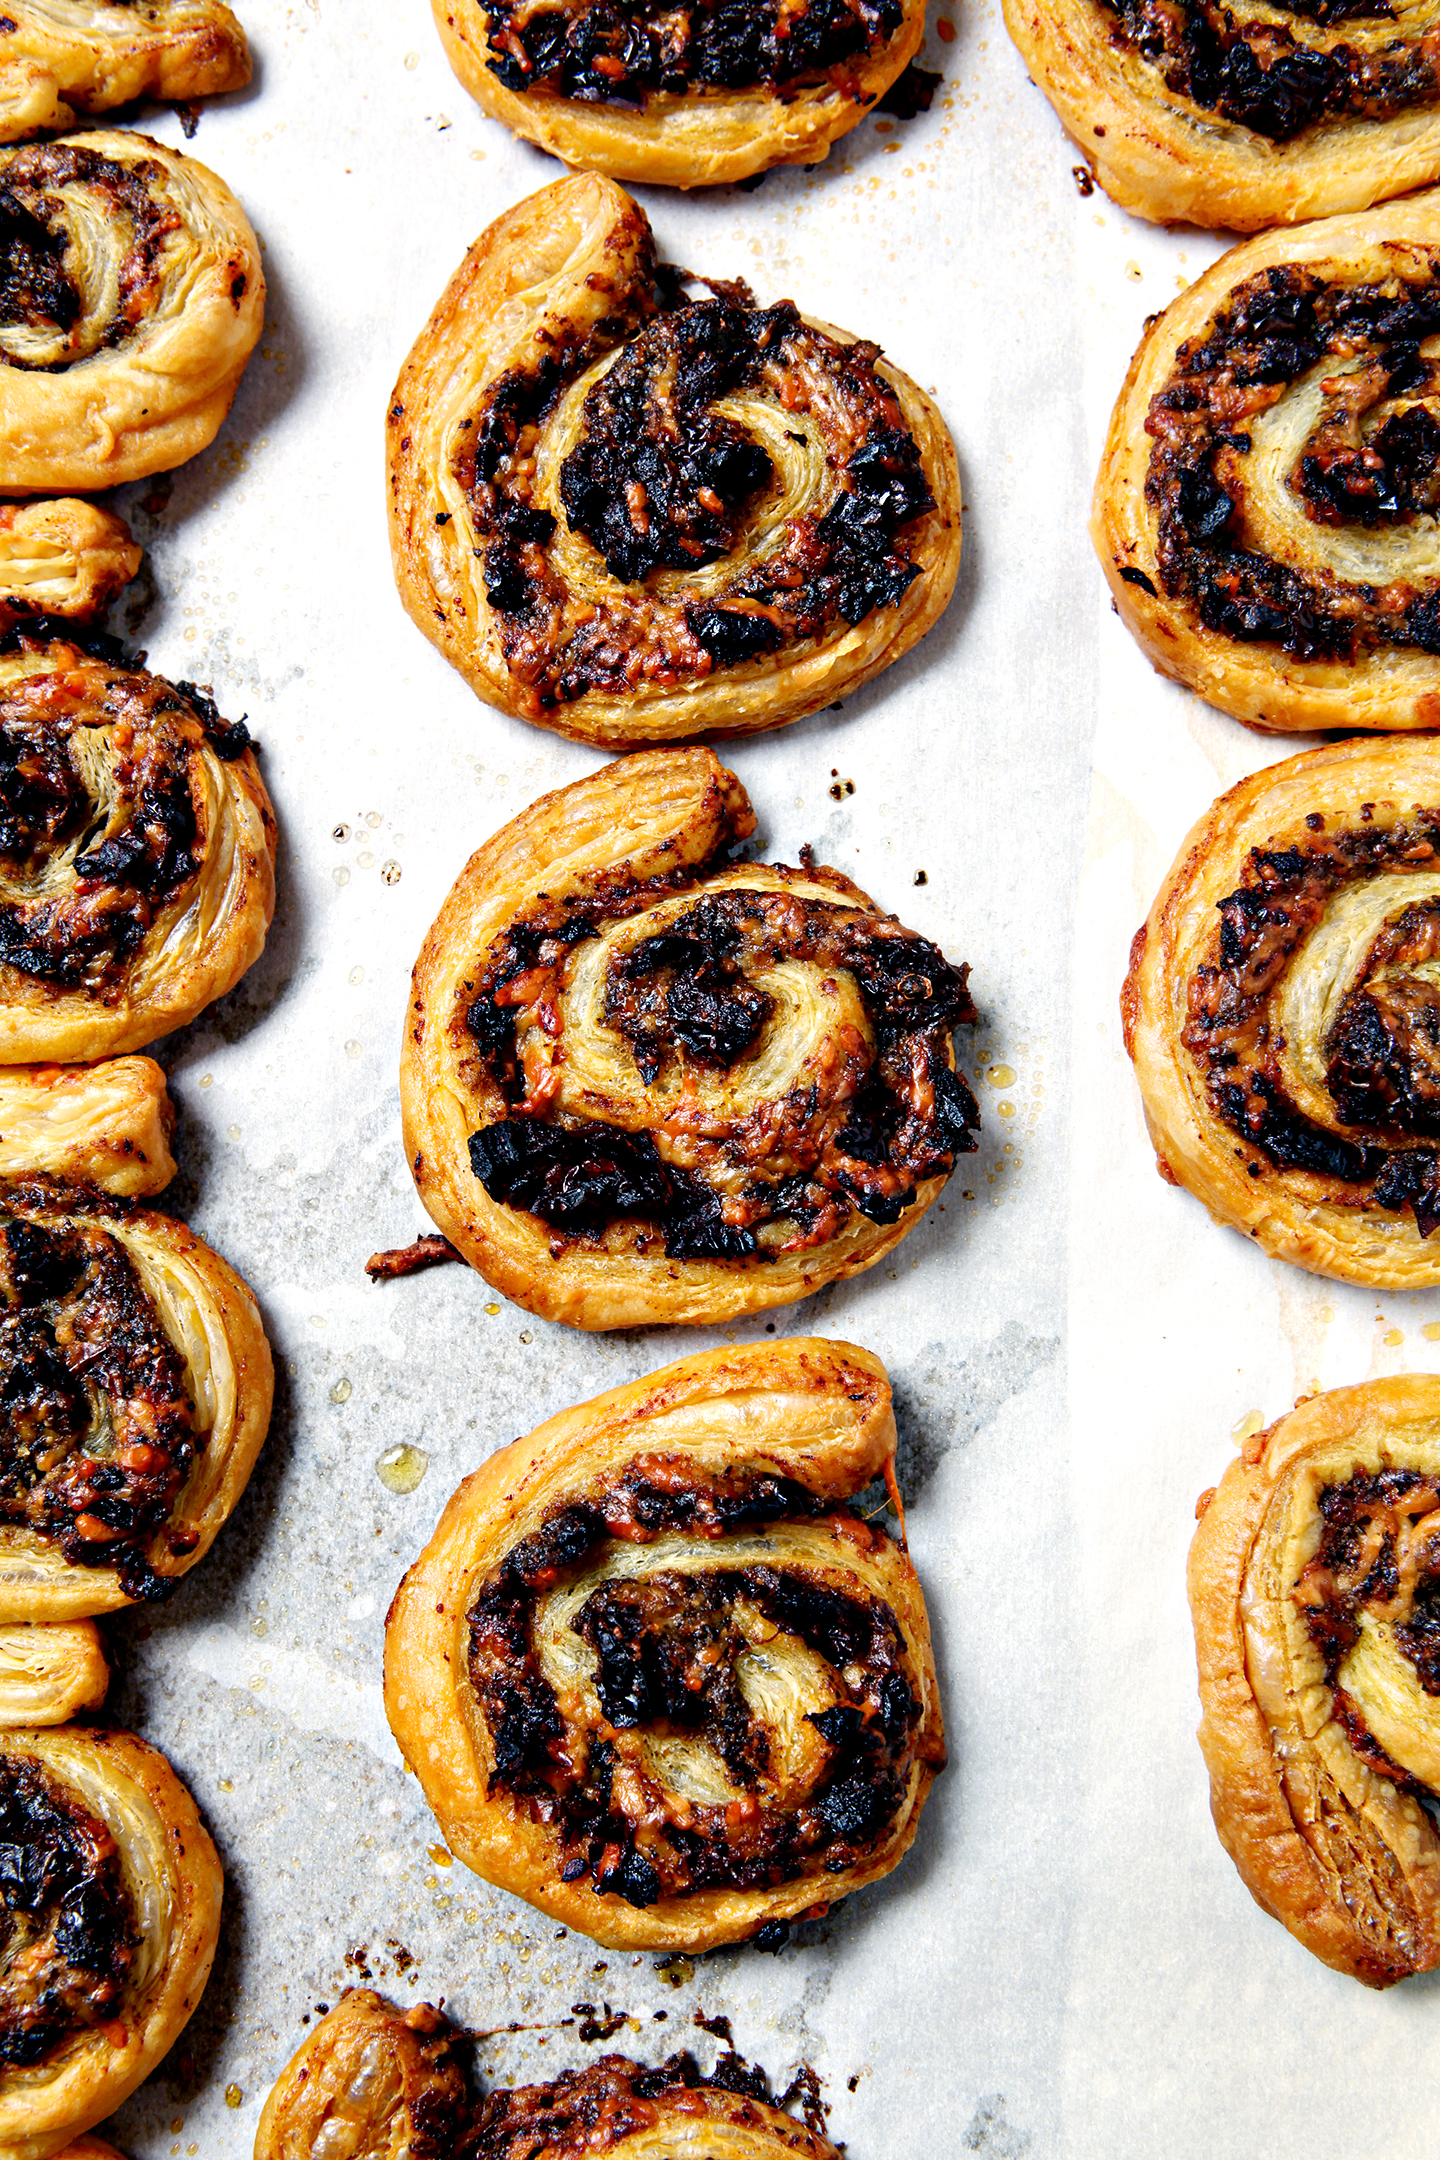 Pesto and Sun-Dried Tomato Pinwheels | Looking for a party app that feeds a crowd and is delicious? These Pesto and Tomato Pinwheels, stuffed with pesto (homemade or store-bought!), sun-dried tomatoes and parmesan cheese, are the perfect starter! @speckledpalate for @mycookingspot